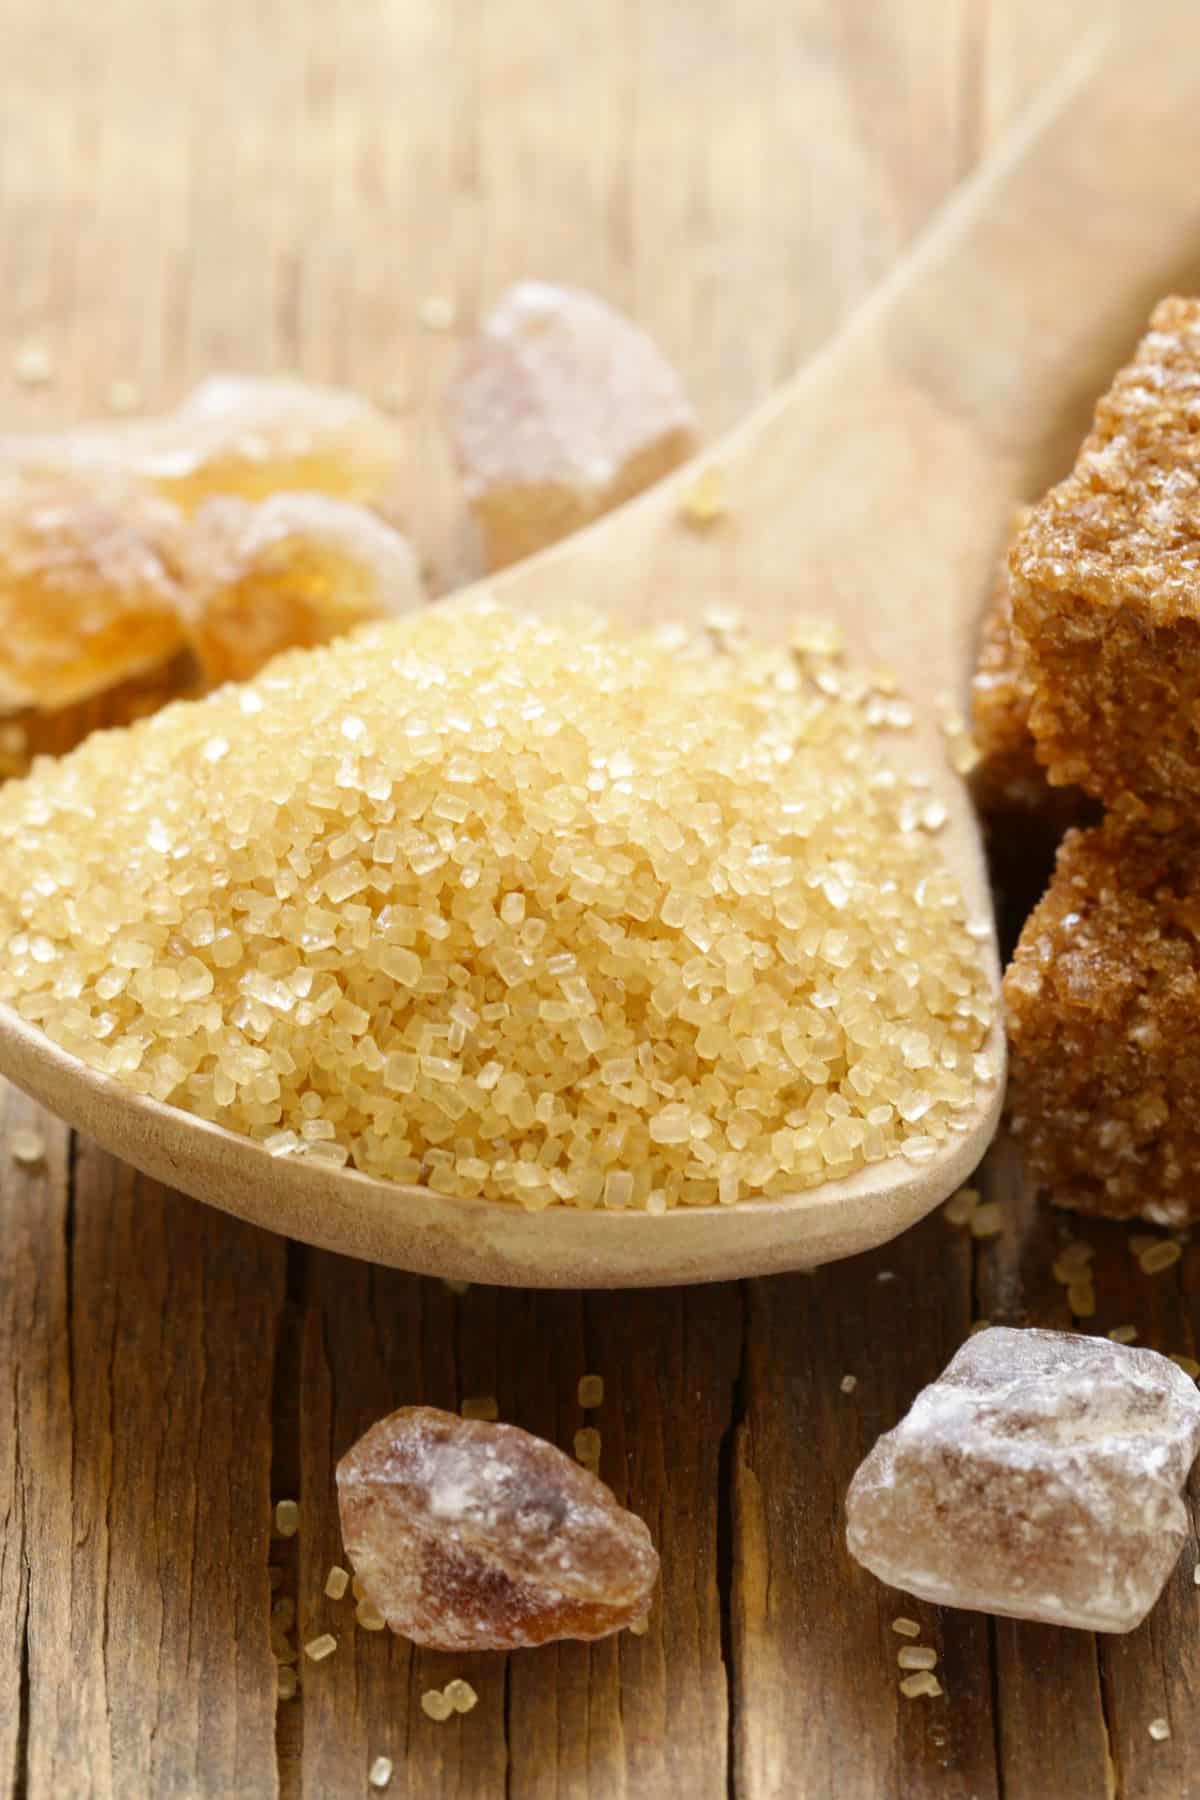 Spoonful of cane sugar with blocks of sugar on wooden surface.